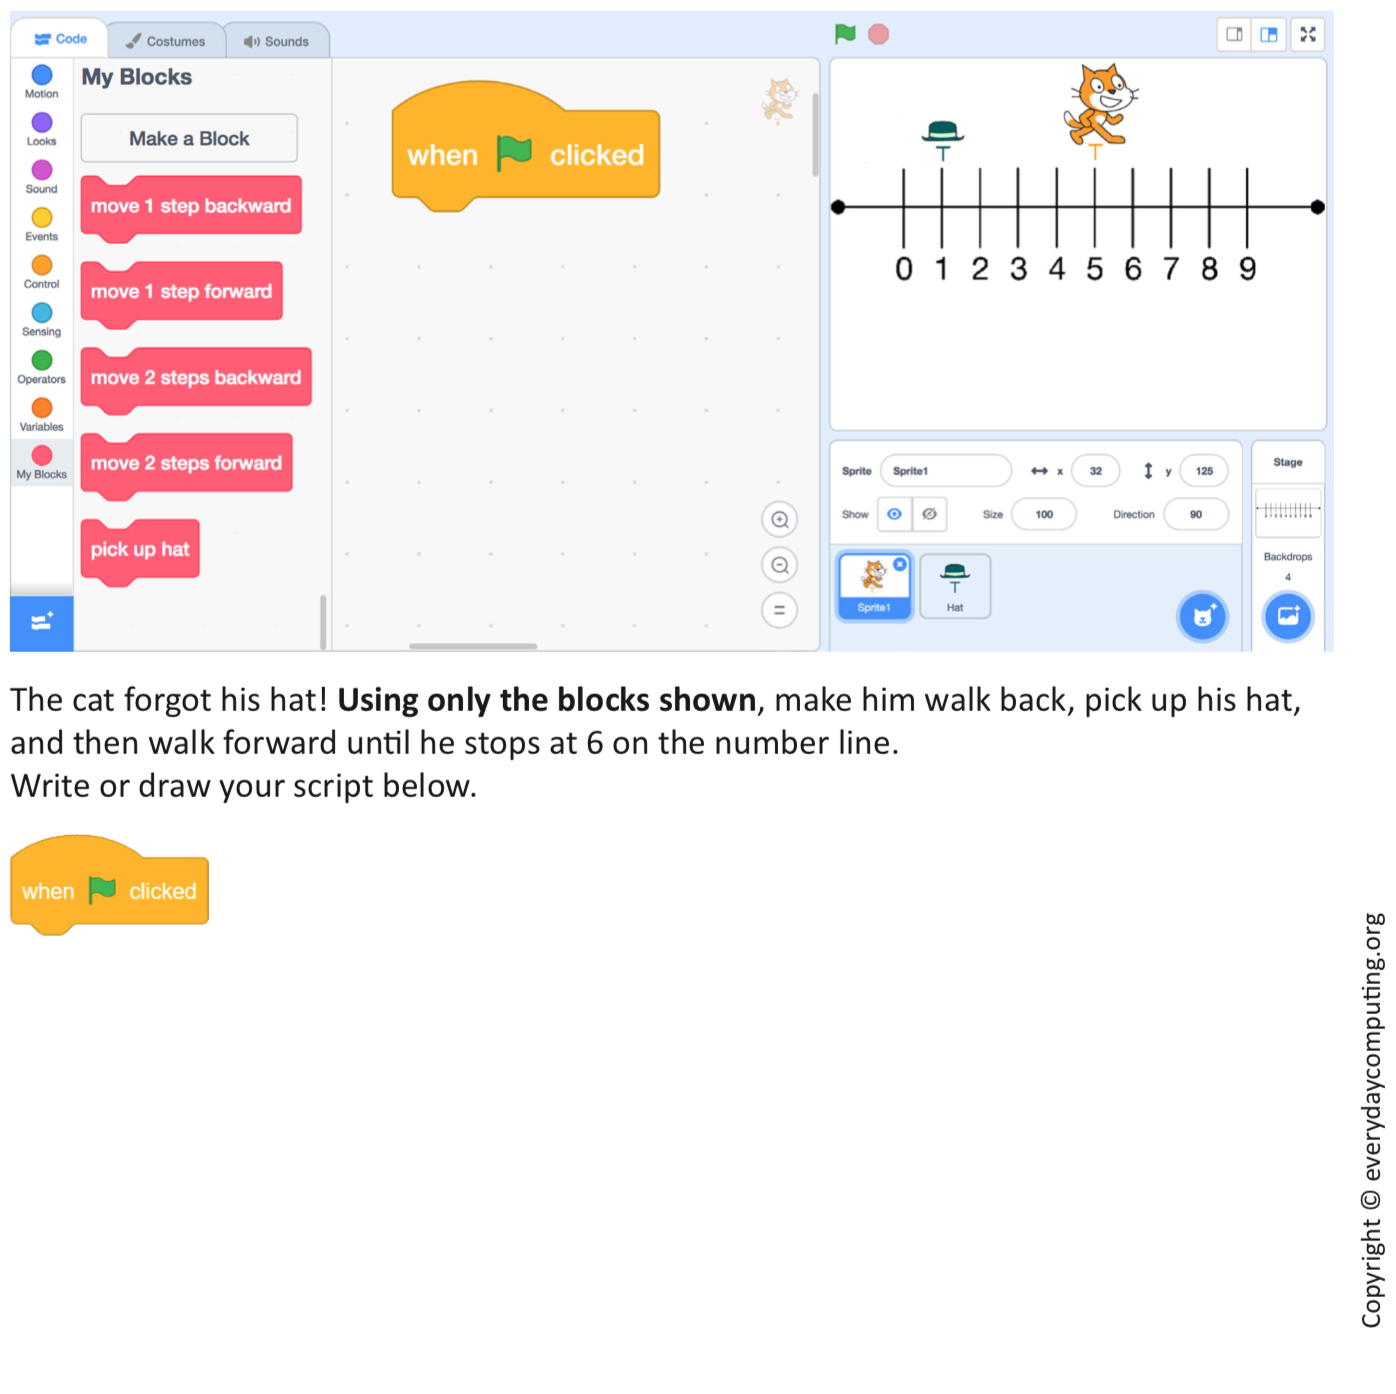 Assessment item designed to measure a student's understanding of sequence by using Scratch blocks to move a cat along a numberline to pick up his hat and then walk to 6 on the numberline